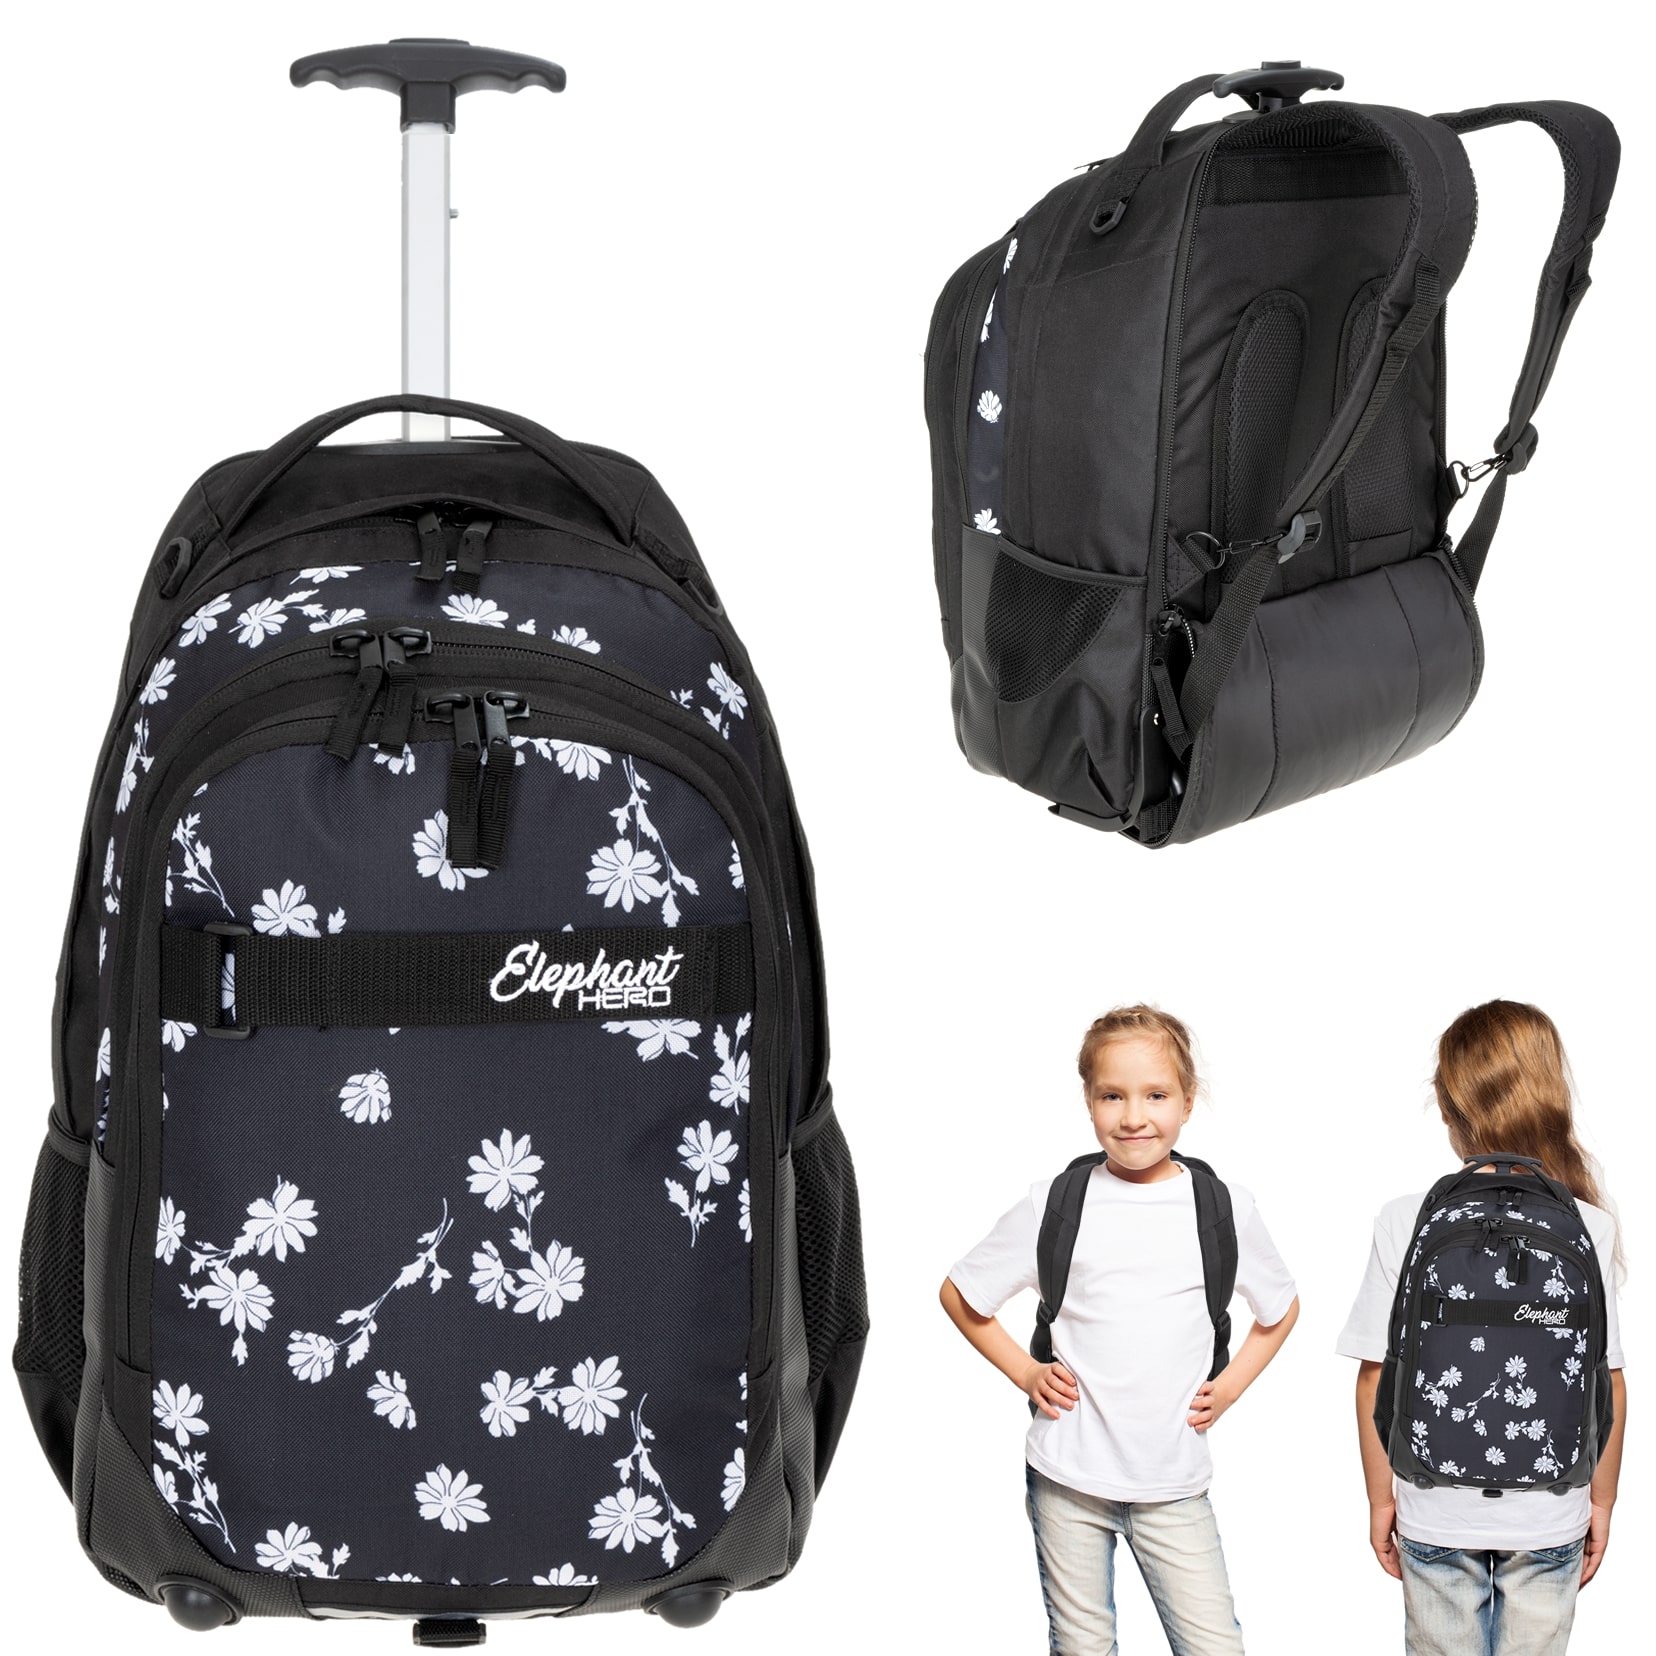 Trolley ELEPHANT HERO SIGNATURE Schultrolley Schulrucksack Mo 12646 BUTTERFLY f 